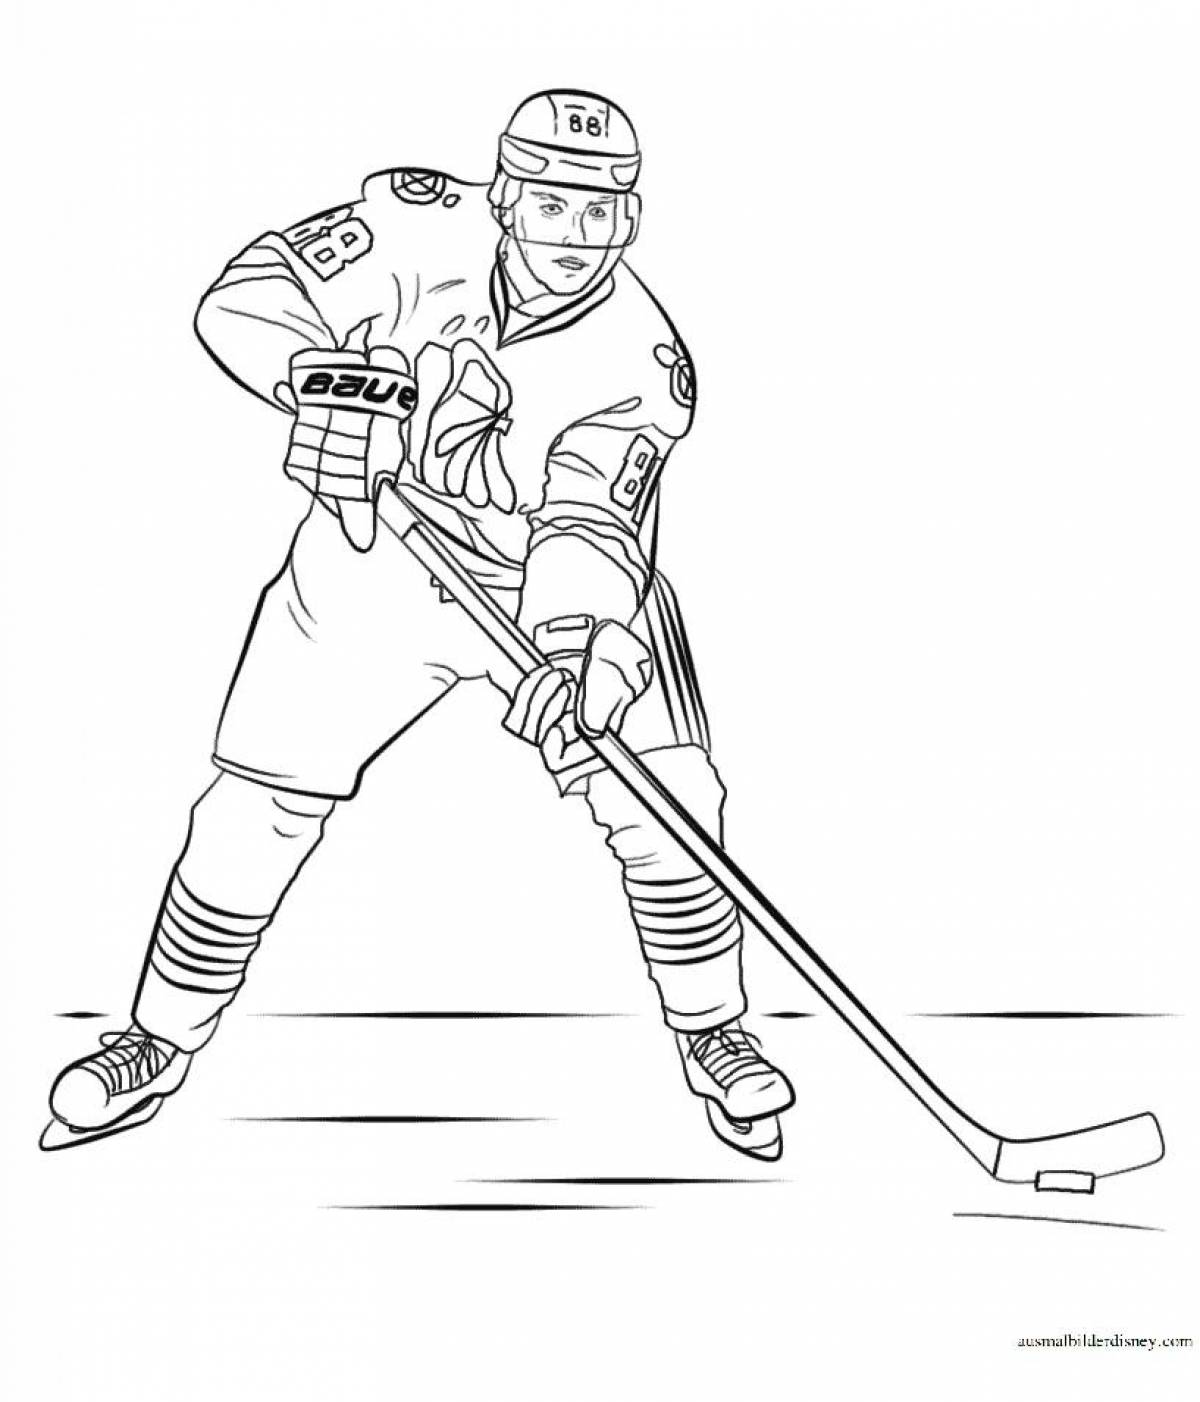 Fabulous hockey player coloring book for kids